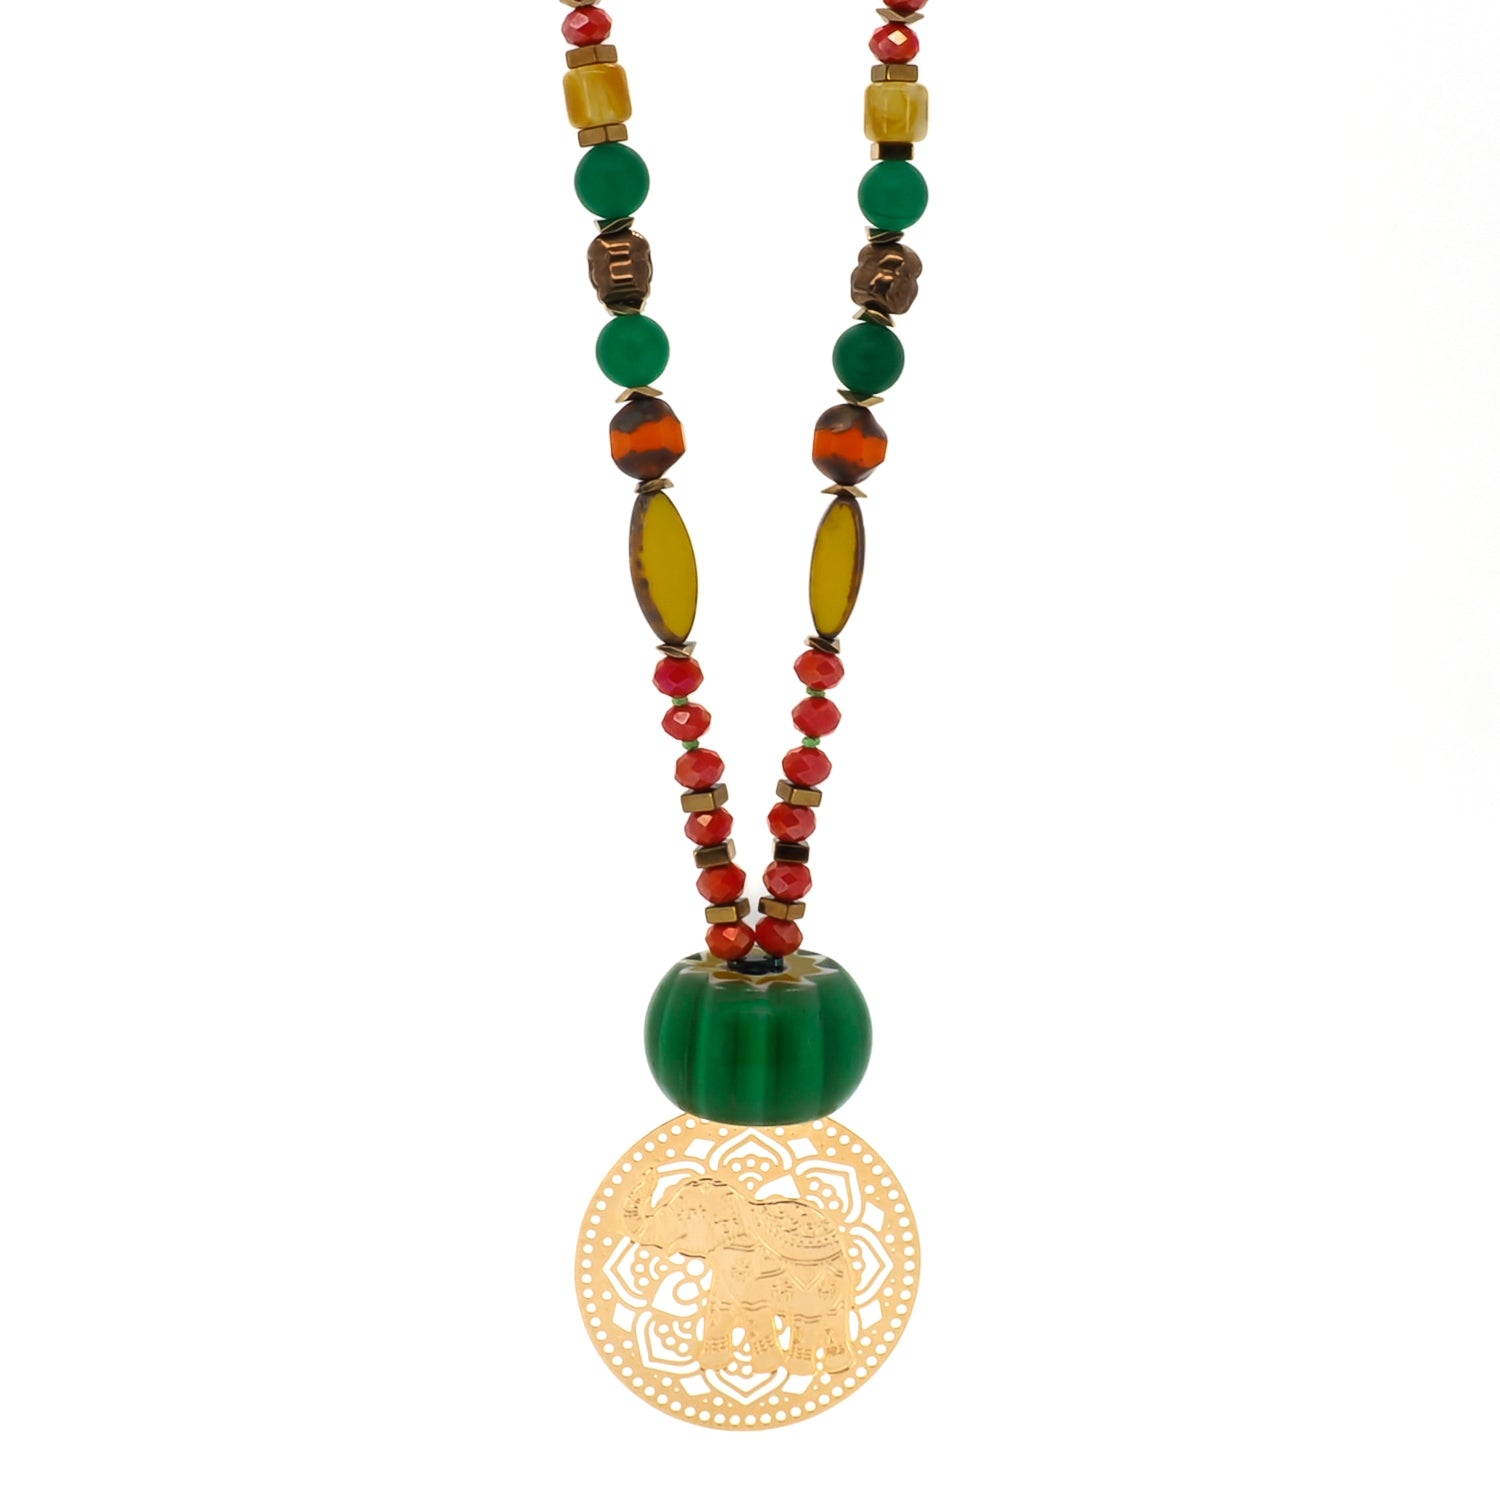 The Mystic Bohemian Elephant Necklace, showcasing its vibrant combination of crystal beads, green jade beads, African beads, and the captivating handmade glass green floral bead.